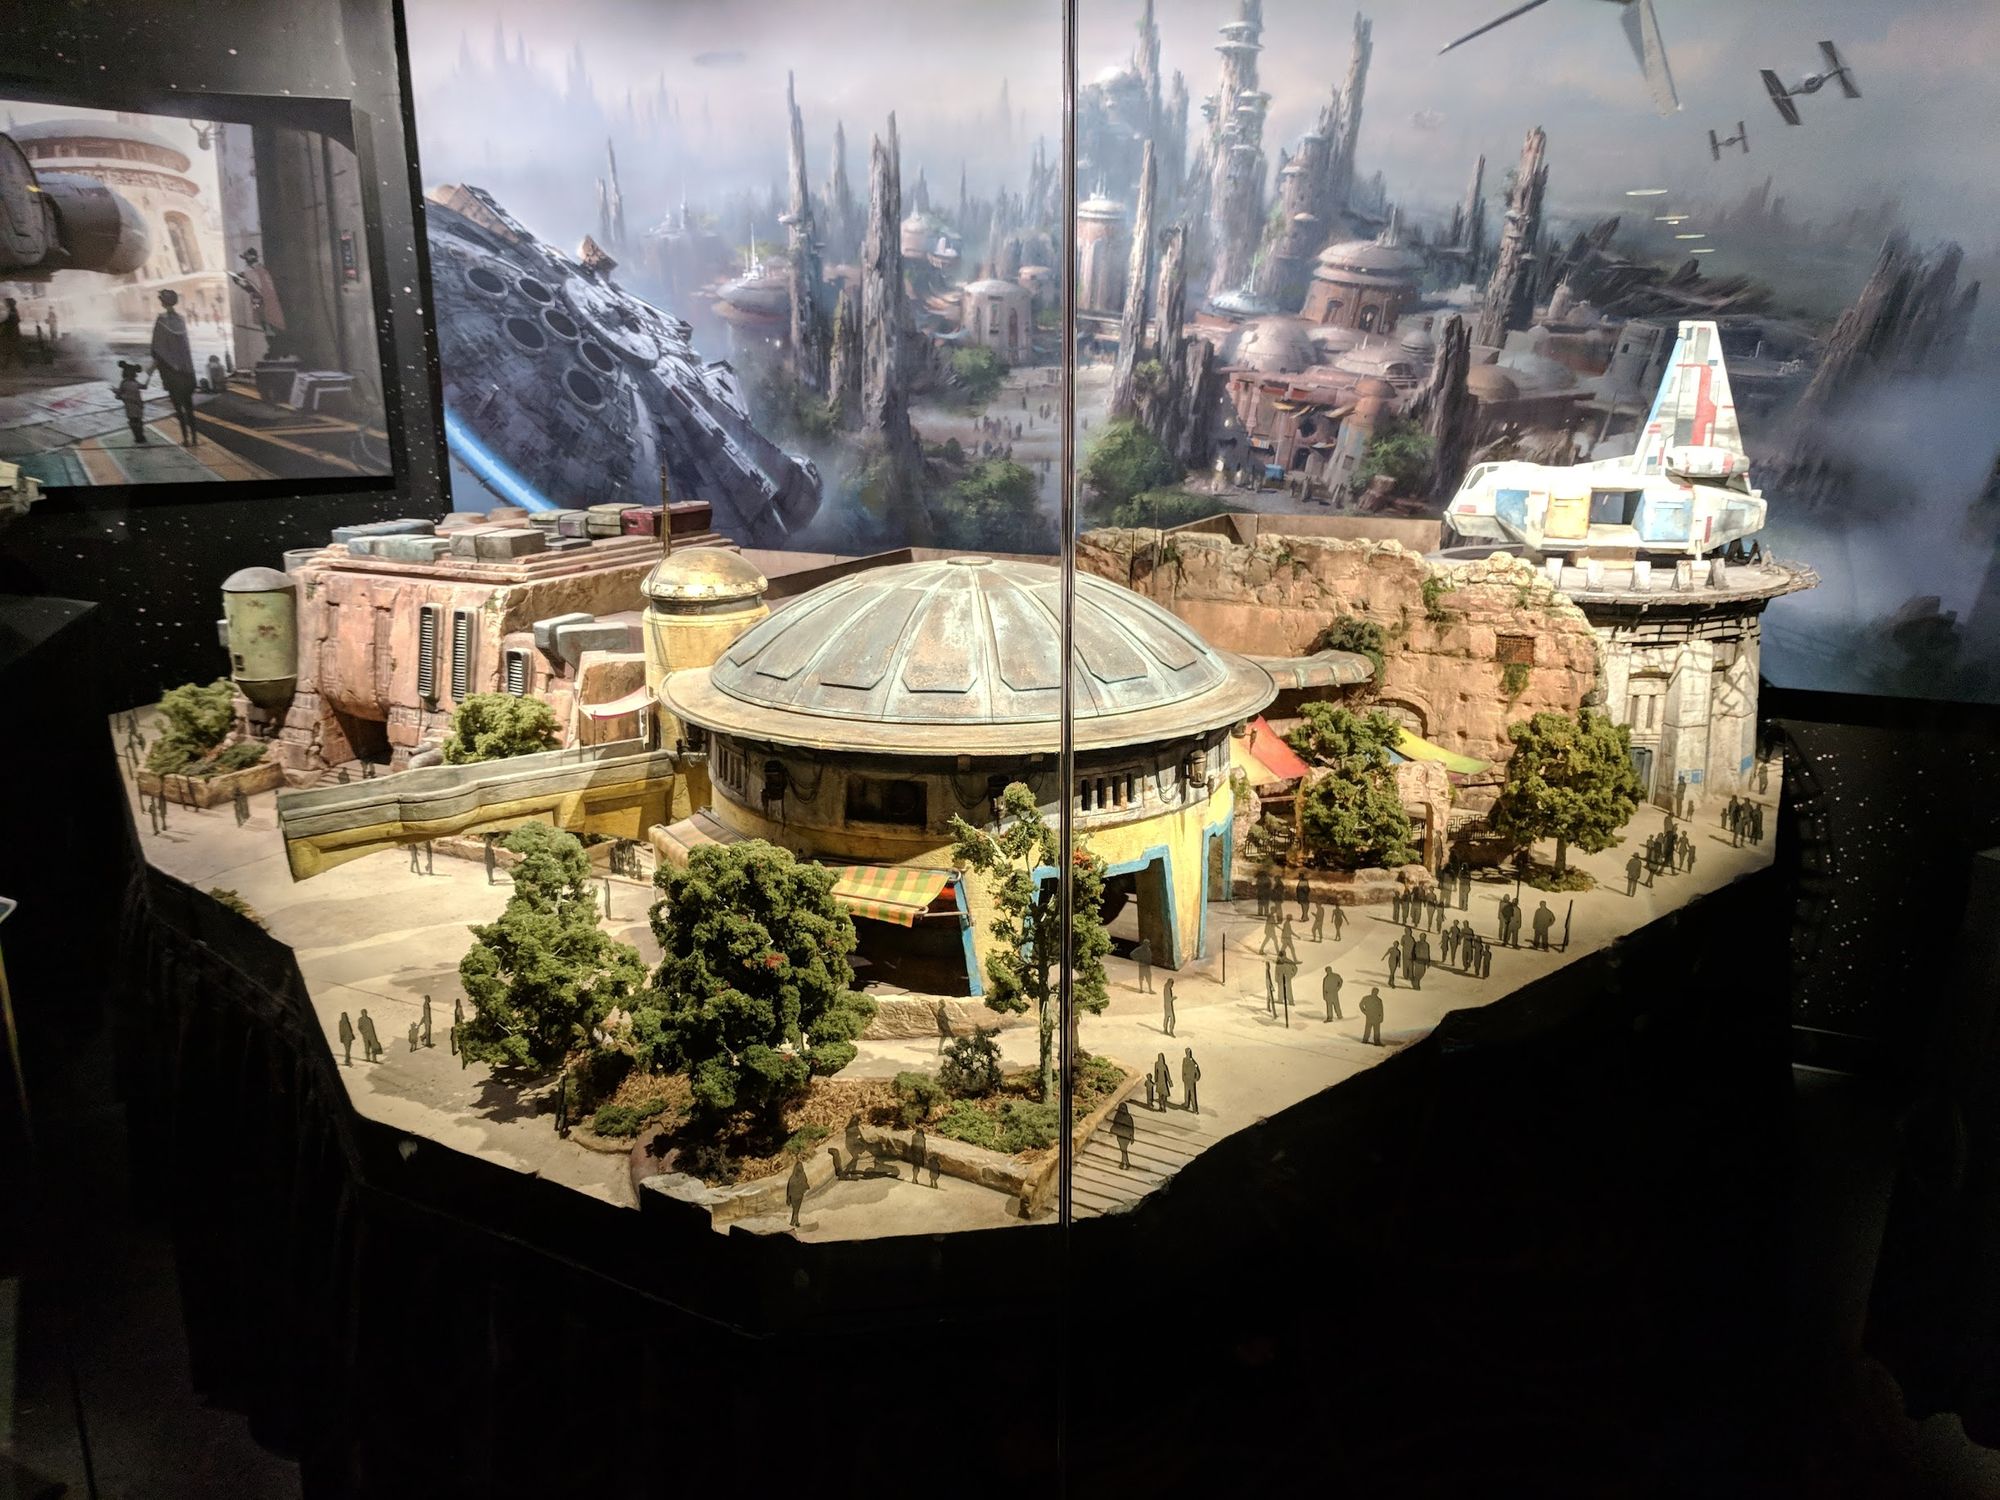 Episode 10 - Galaxy's Edge Theme, Bedbugs, Mystery Chicken Feathers